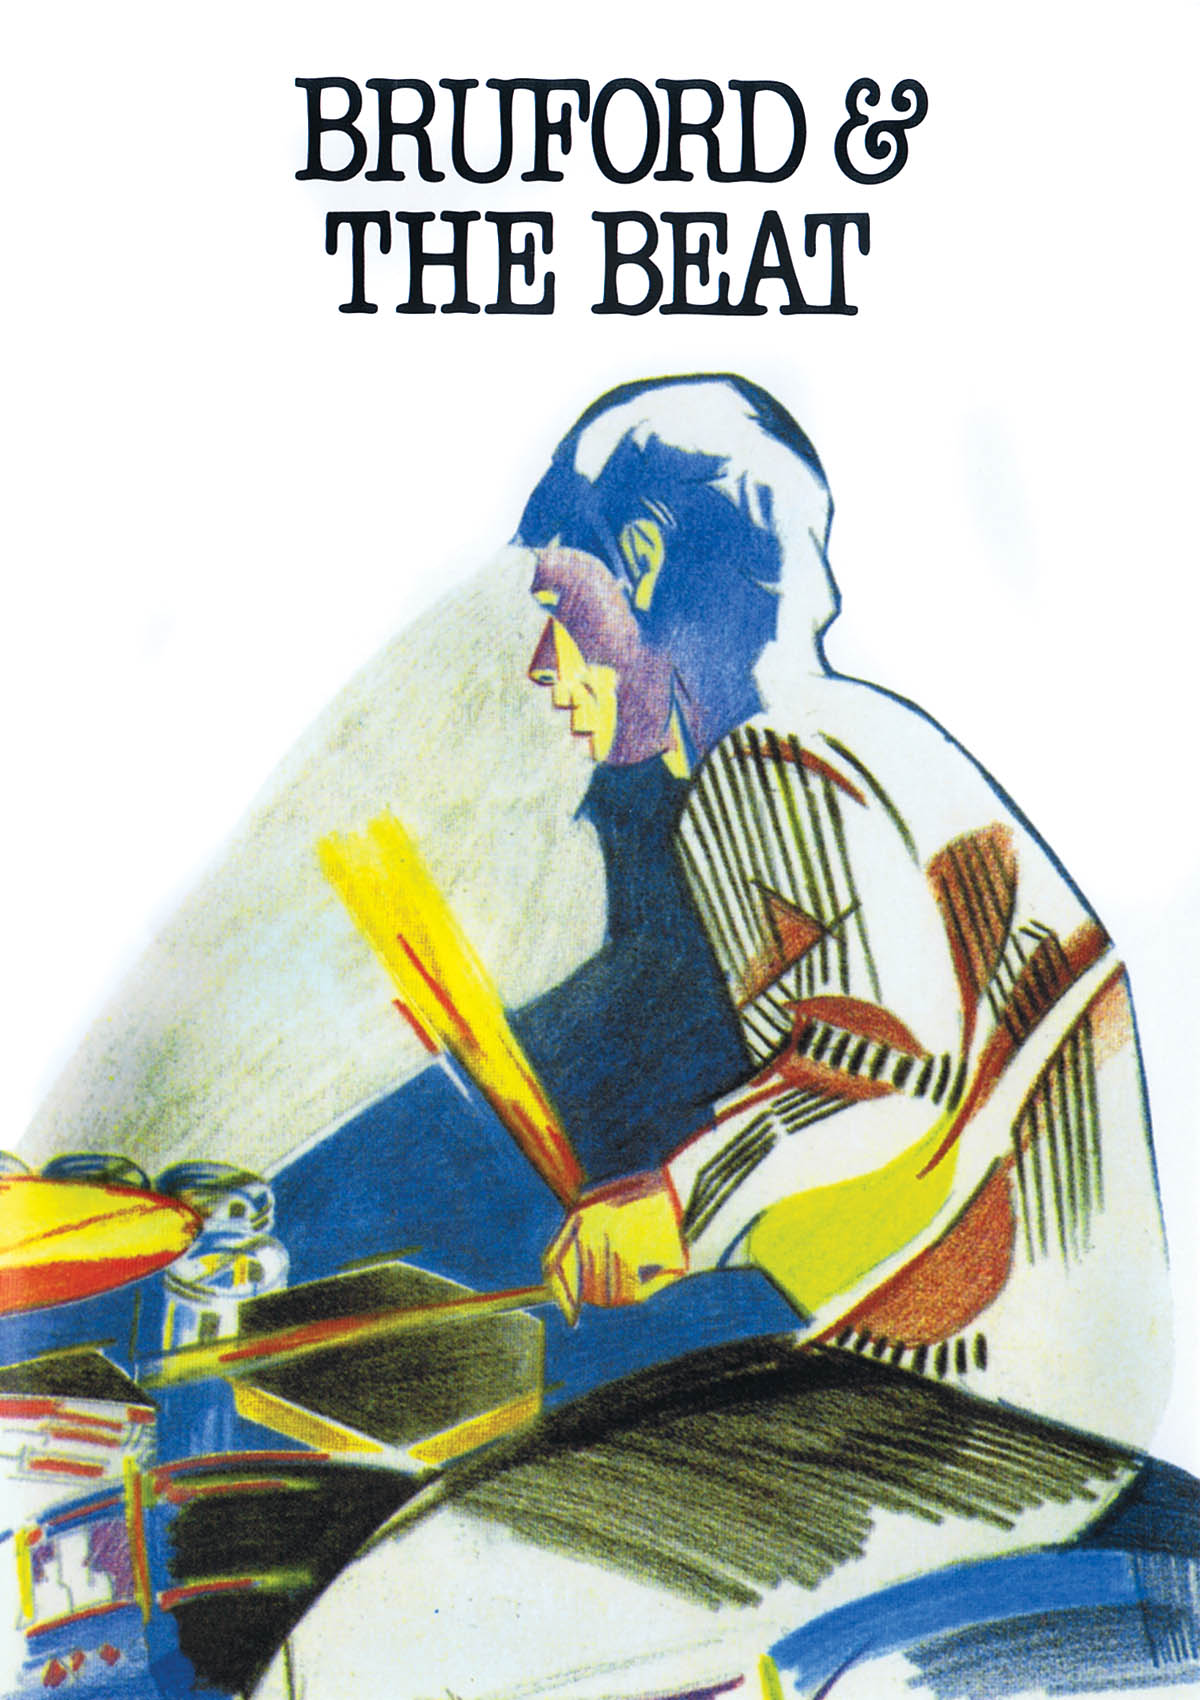 Bill Bruford: Bruford and the Beat: DVD